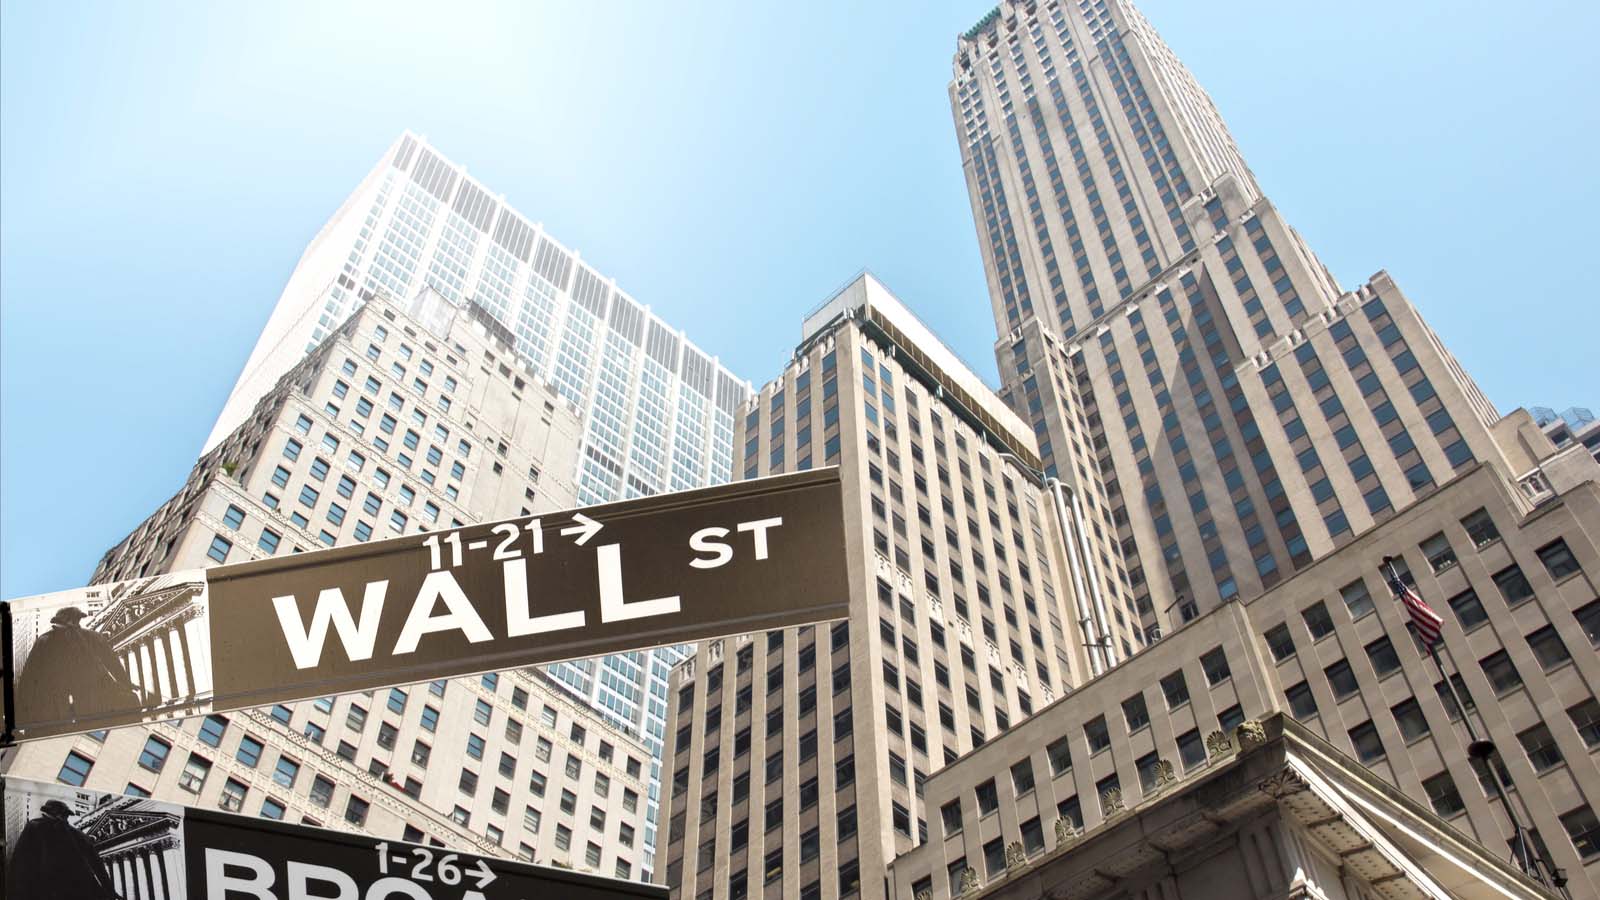 top stocks: skyscraper buildings viewed from the ground with Wall Street street sign in the foreground (Pre-Market Stock Movers)